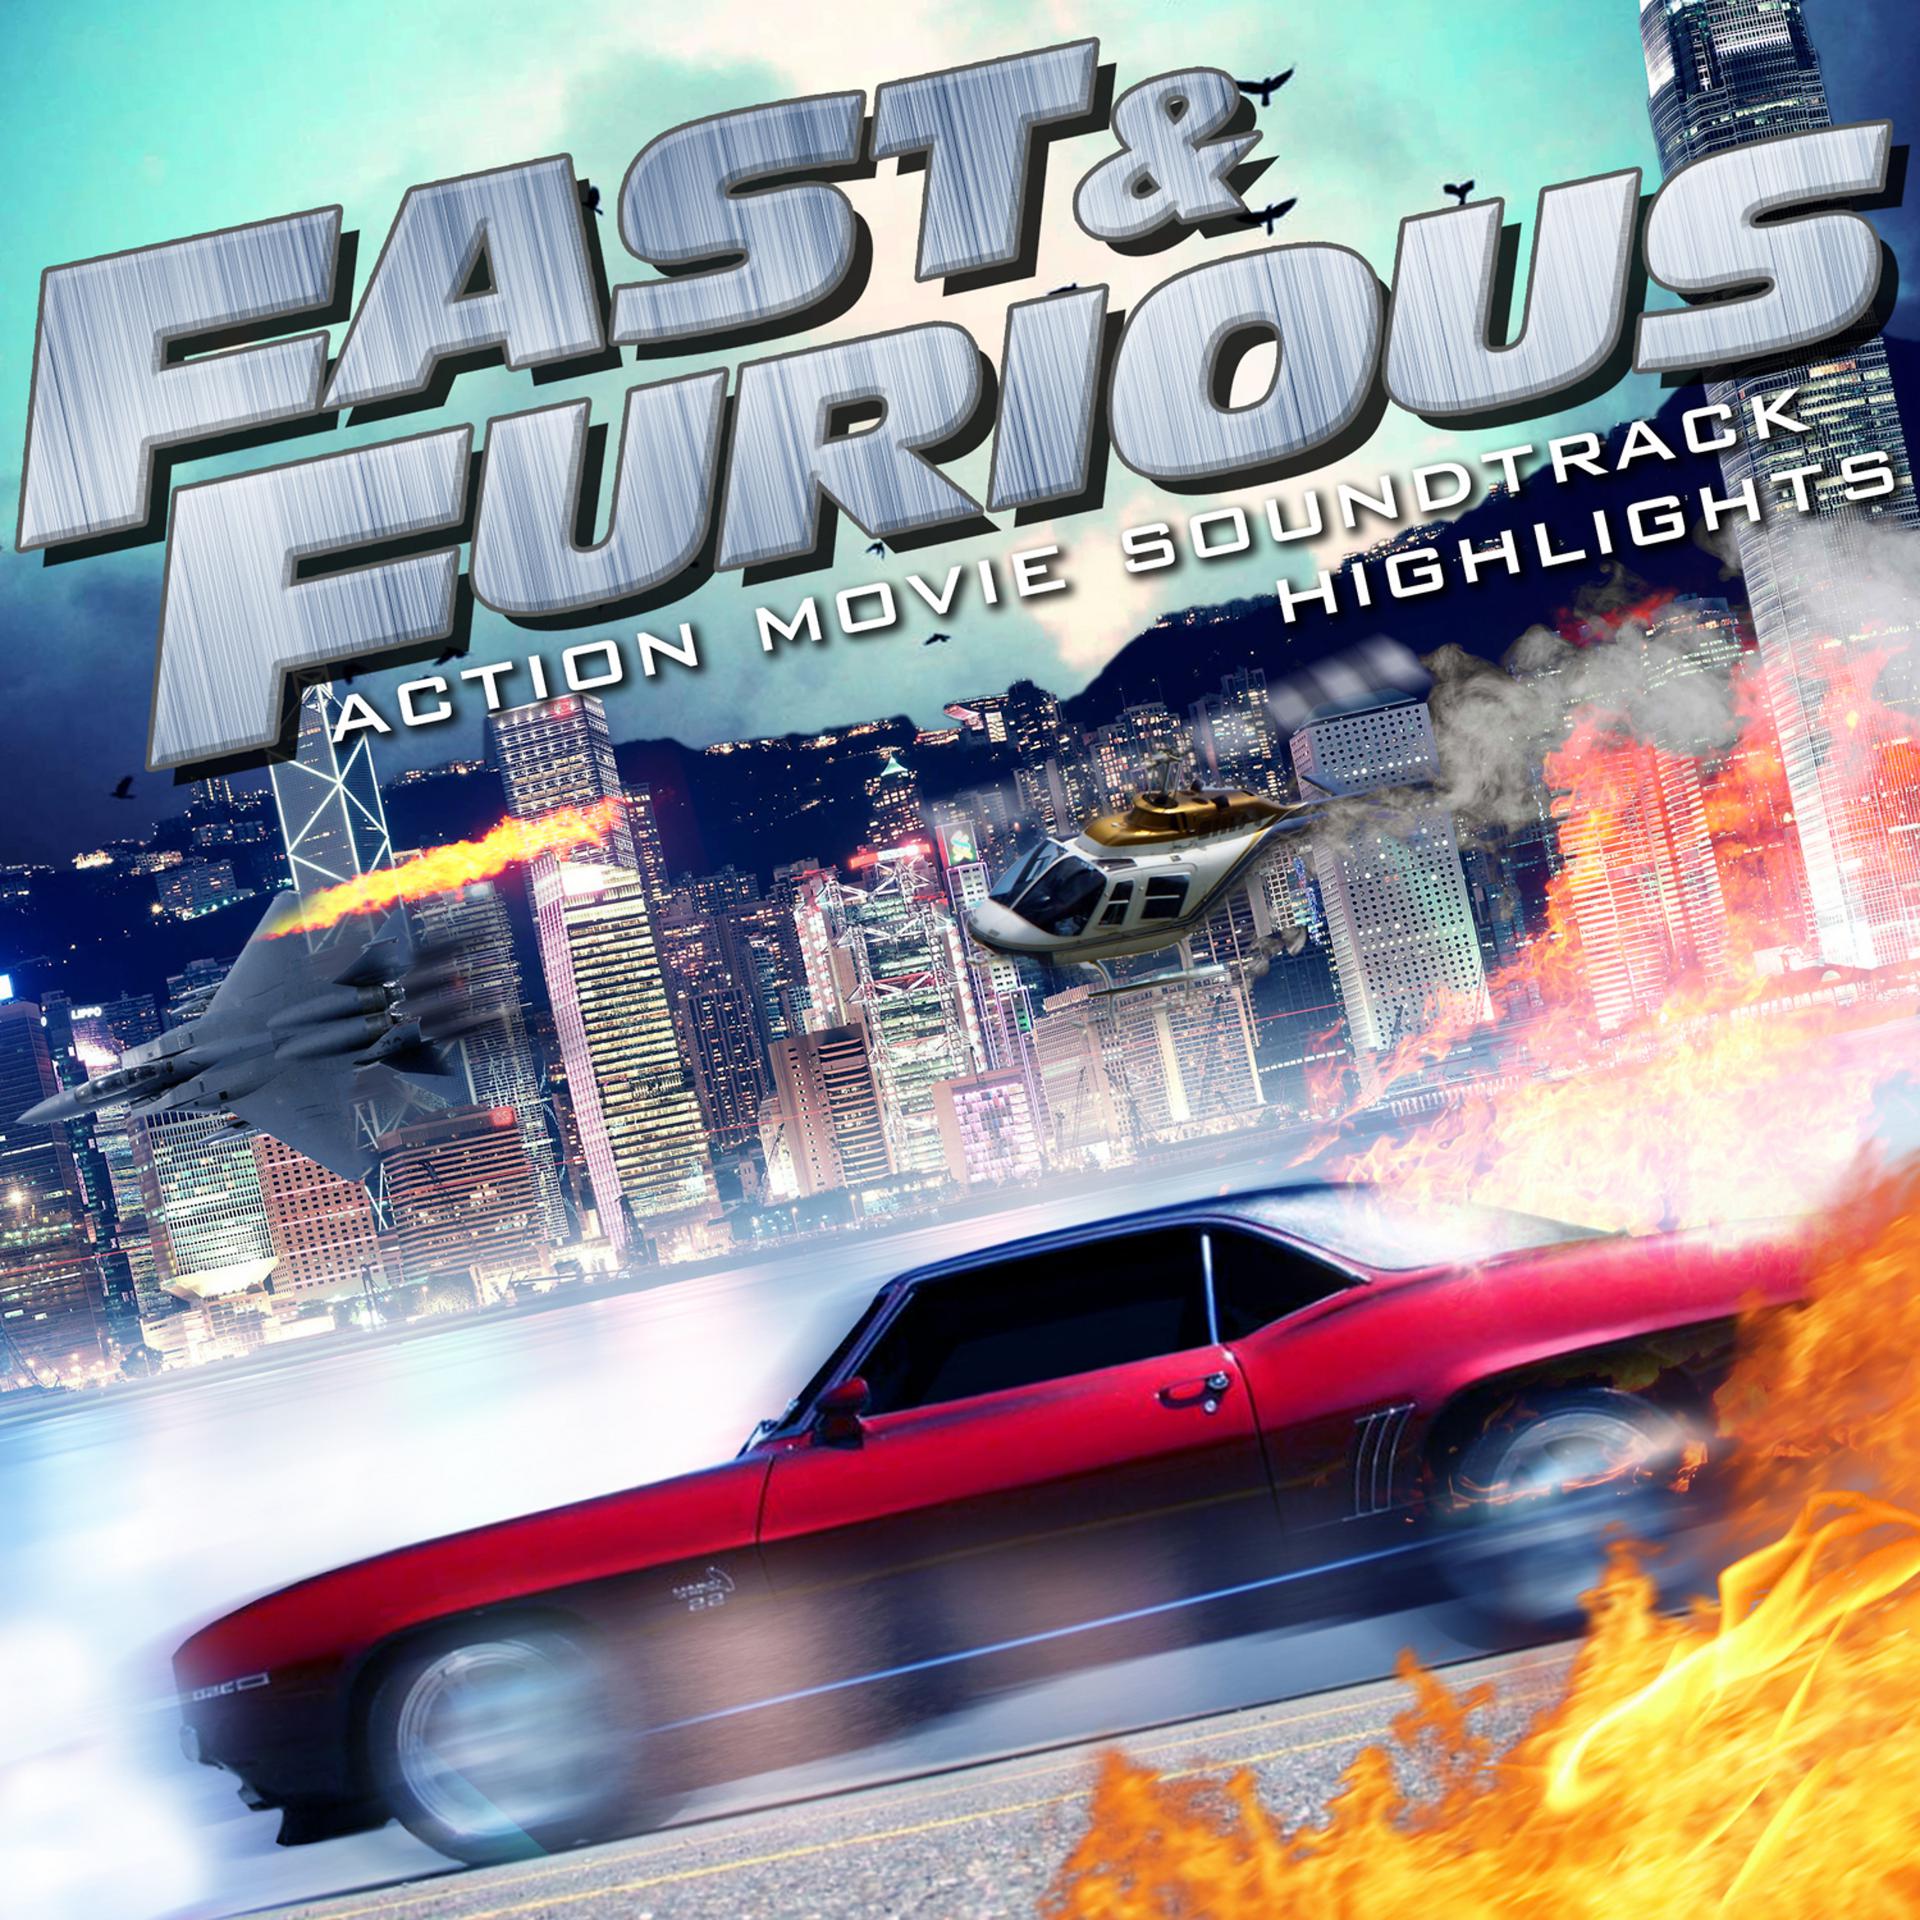 Постер альбома Fast & Furious: Action Movie Soundtrack Highlights